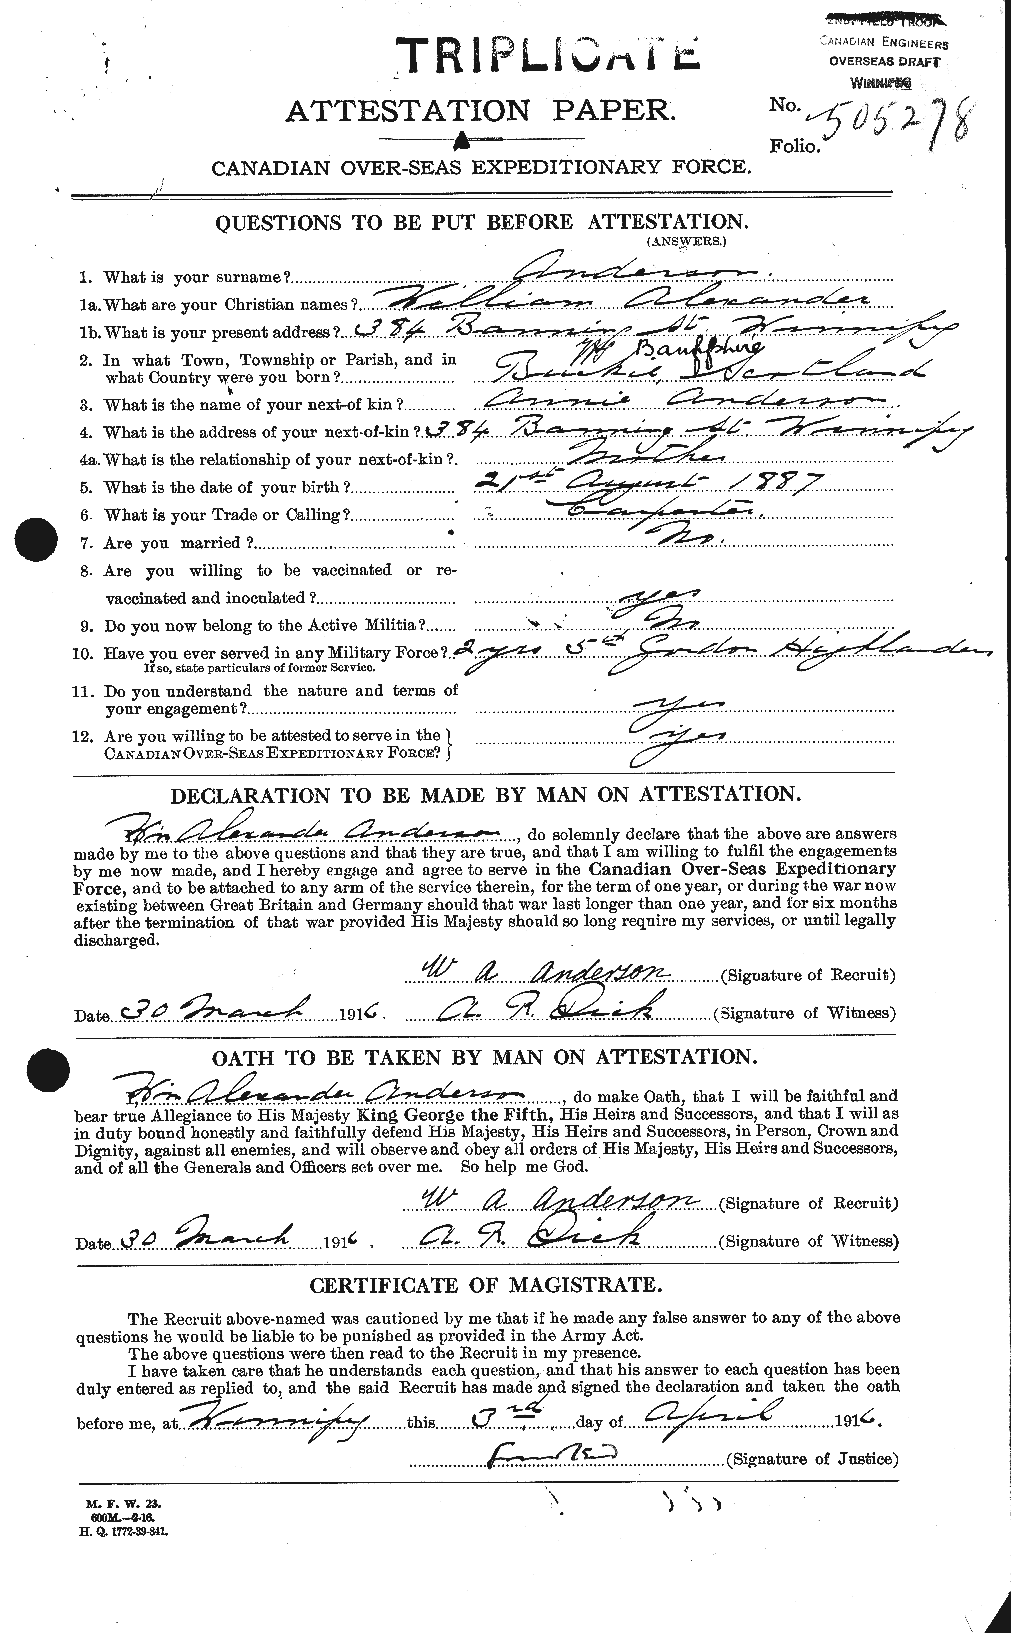 Personnel Records of the First World War - CEF 210770a